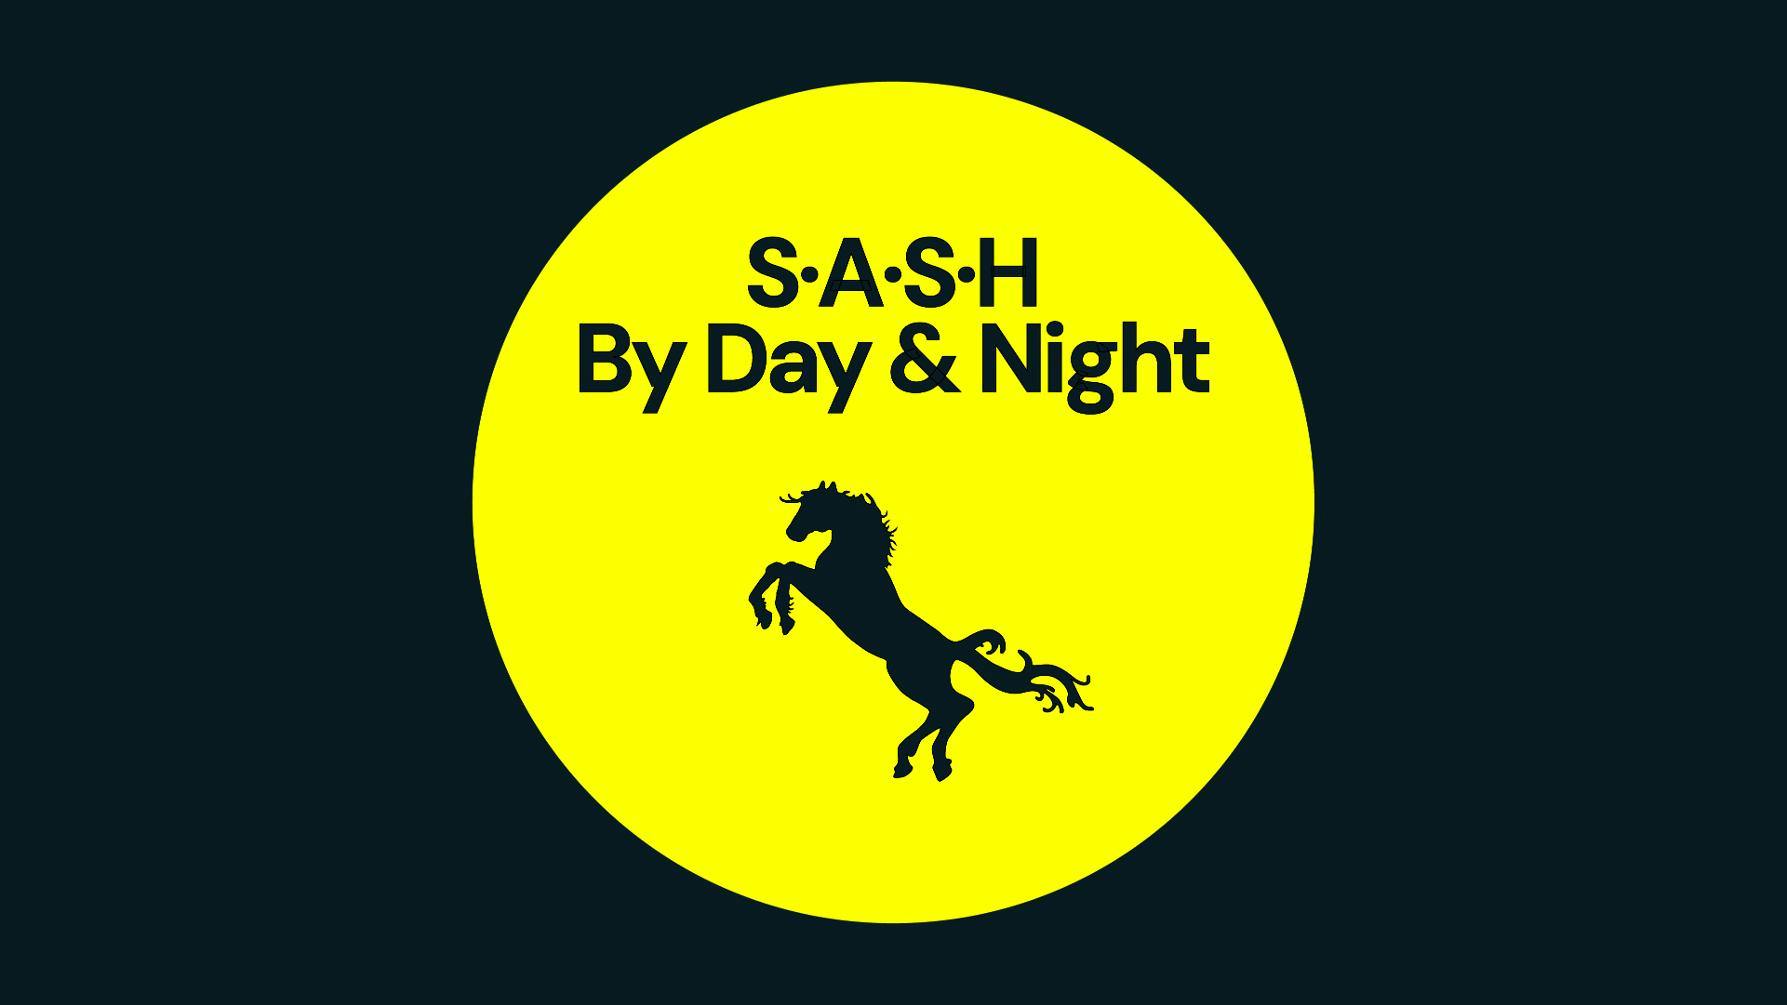 ★ S.A.S.H By Day & Night ★ Sunday 23rd June ★